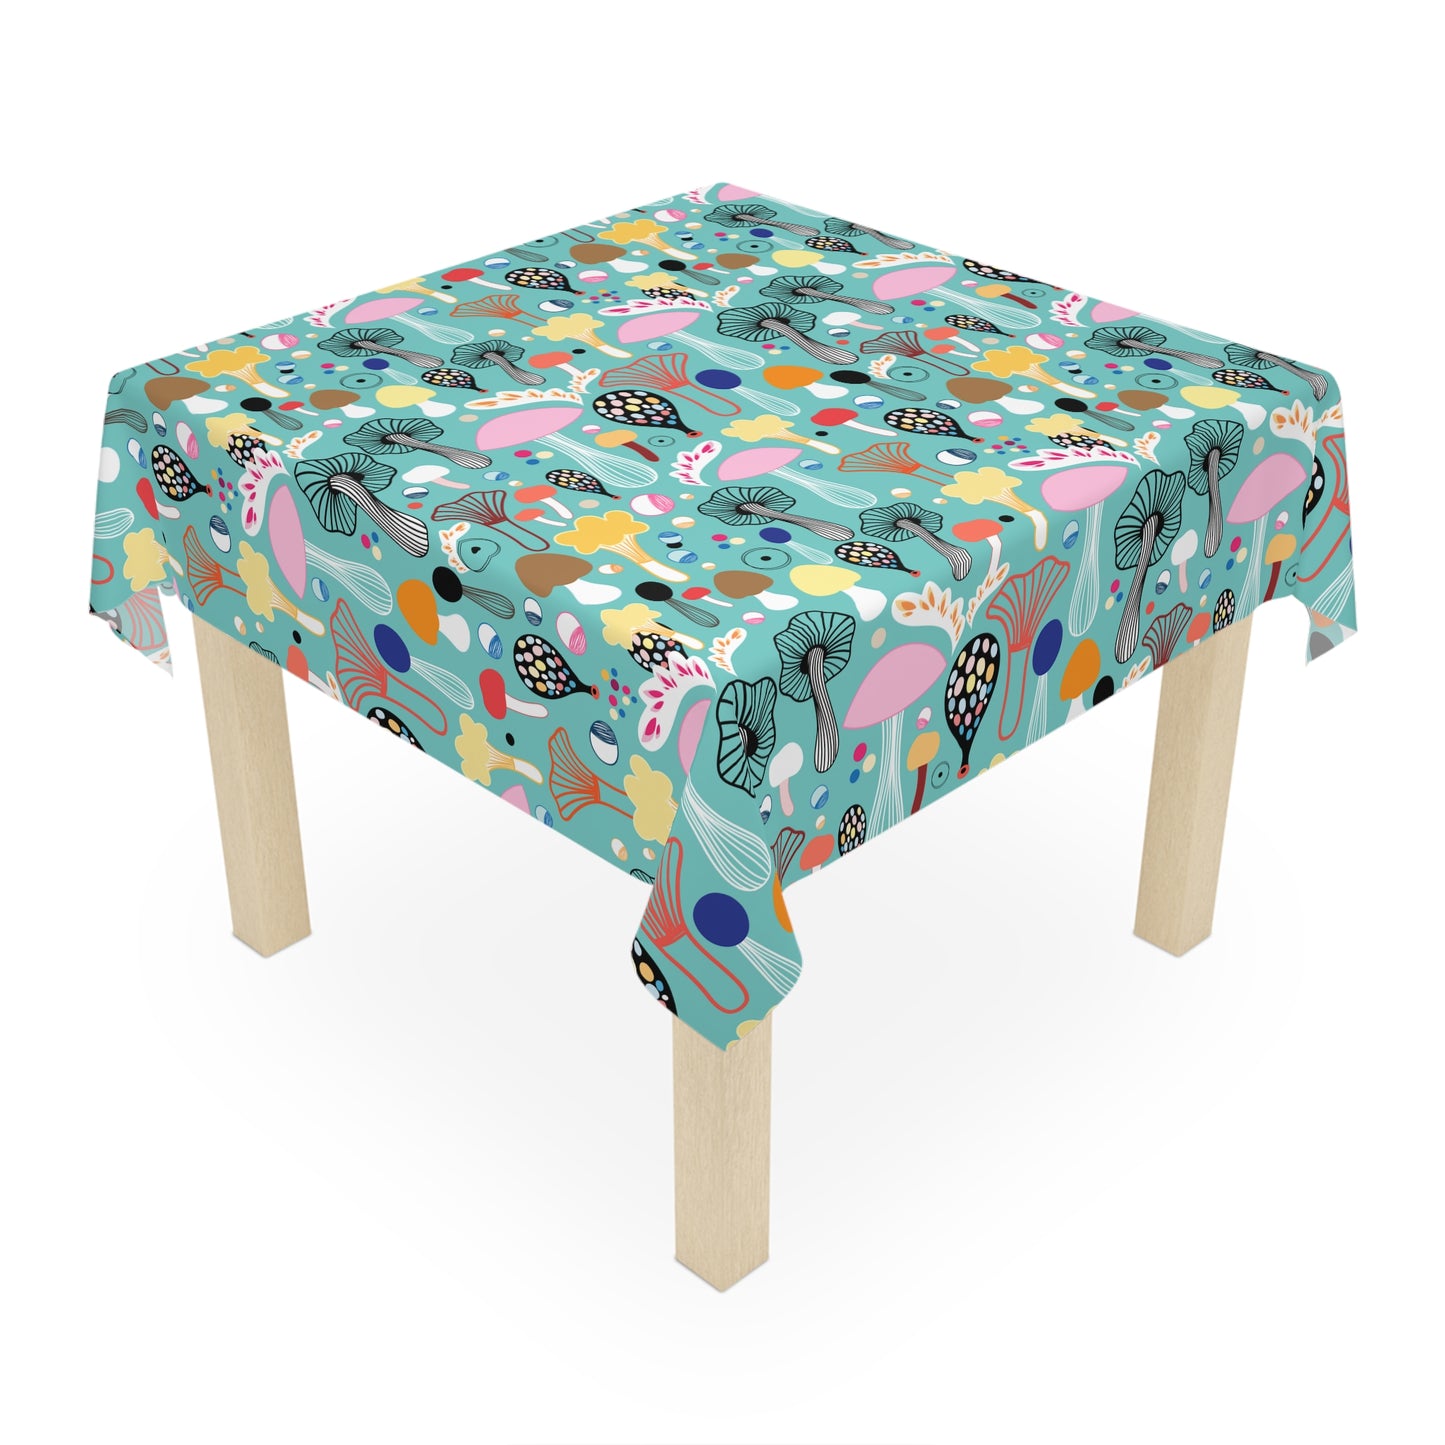 Colorful Mushrooms Tablecloth